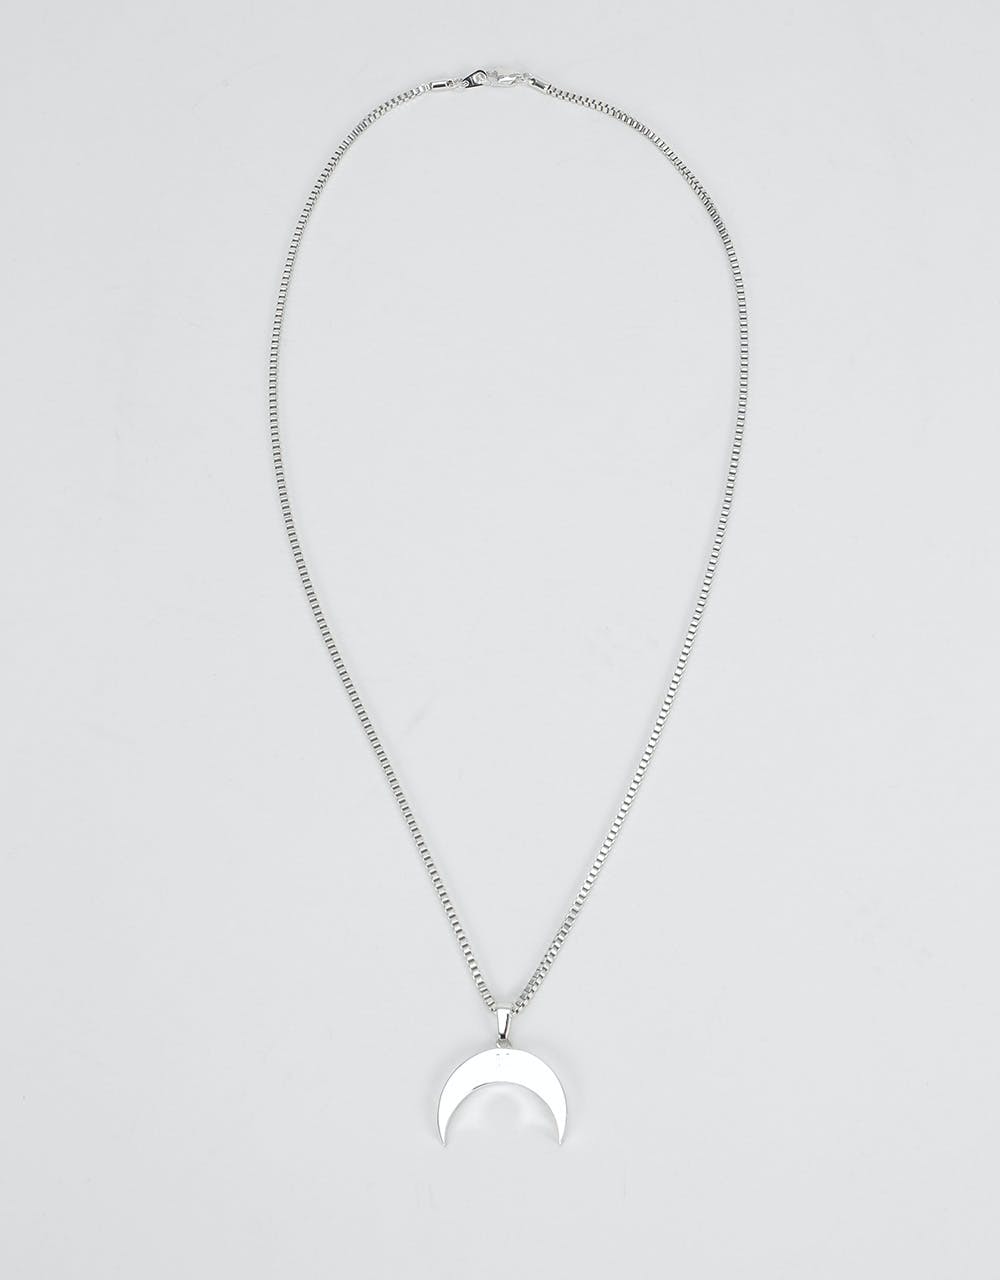 Midvs Co 18K Gold Plated Luna Necklace - White Gold